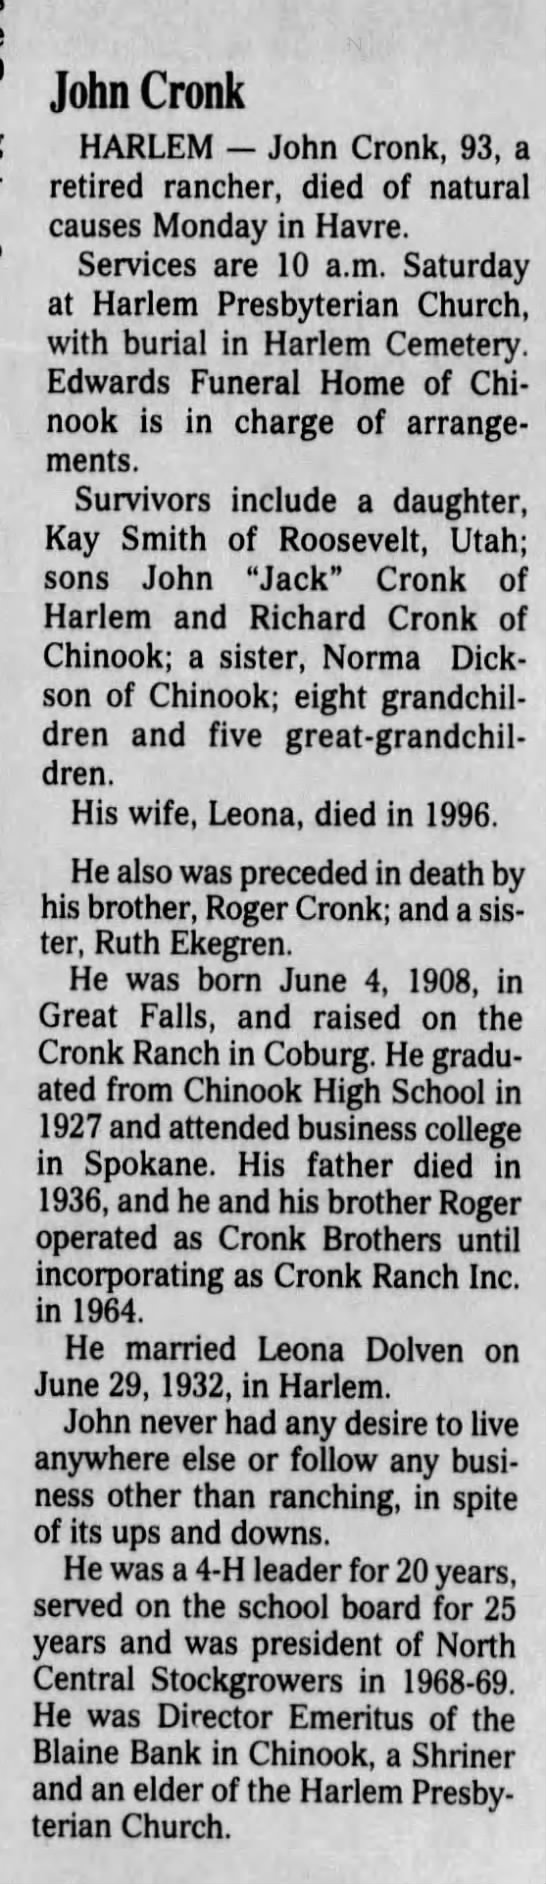 Clipping from Great Falls Tribune